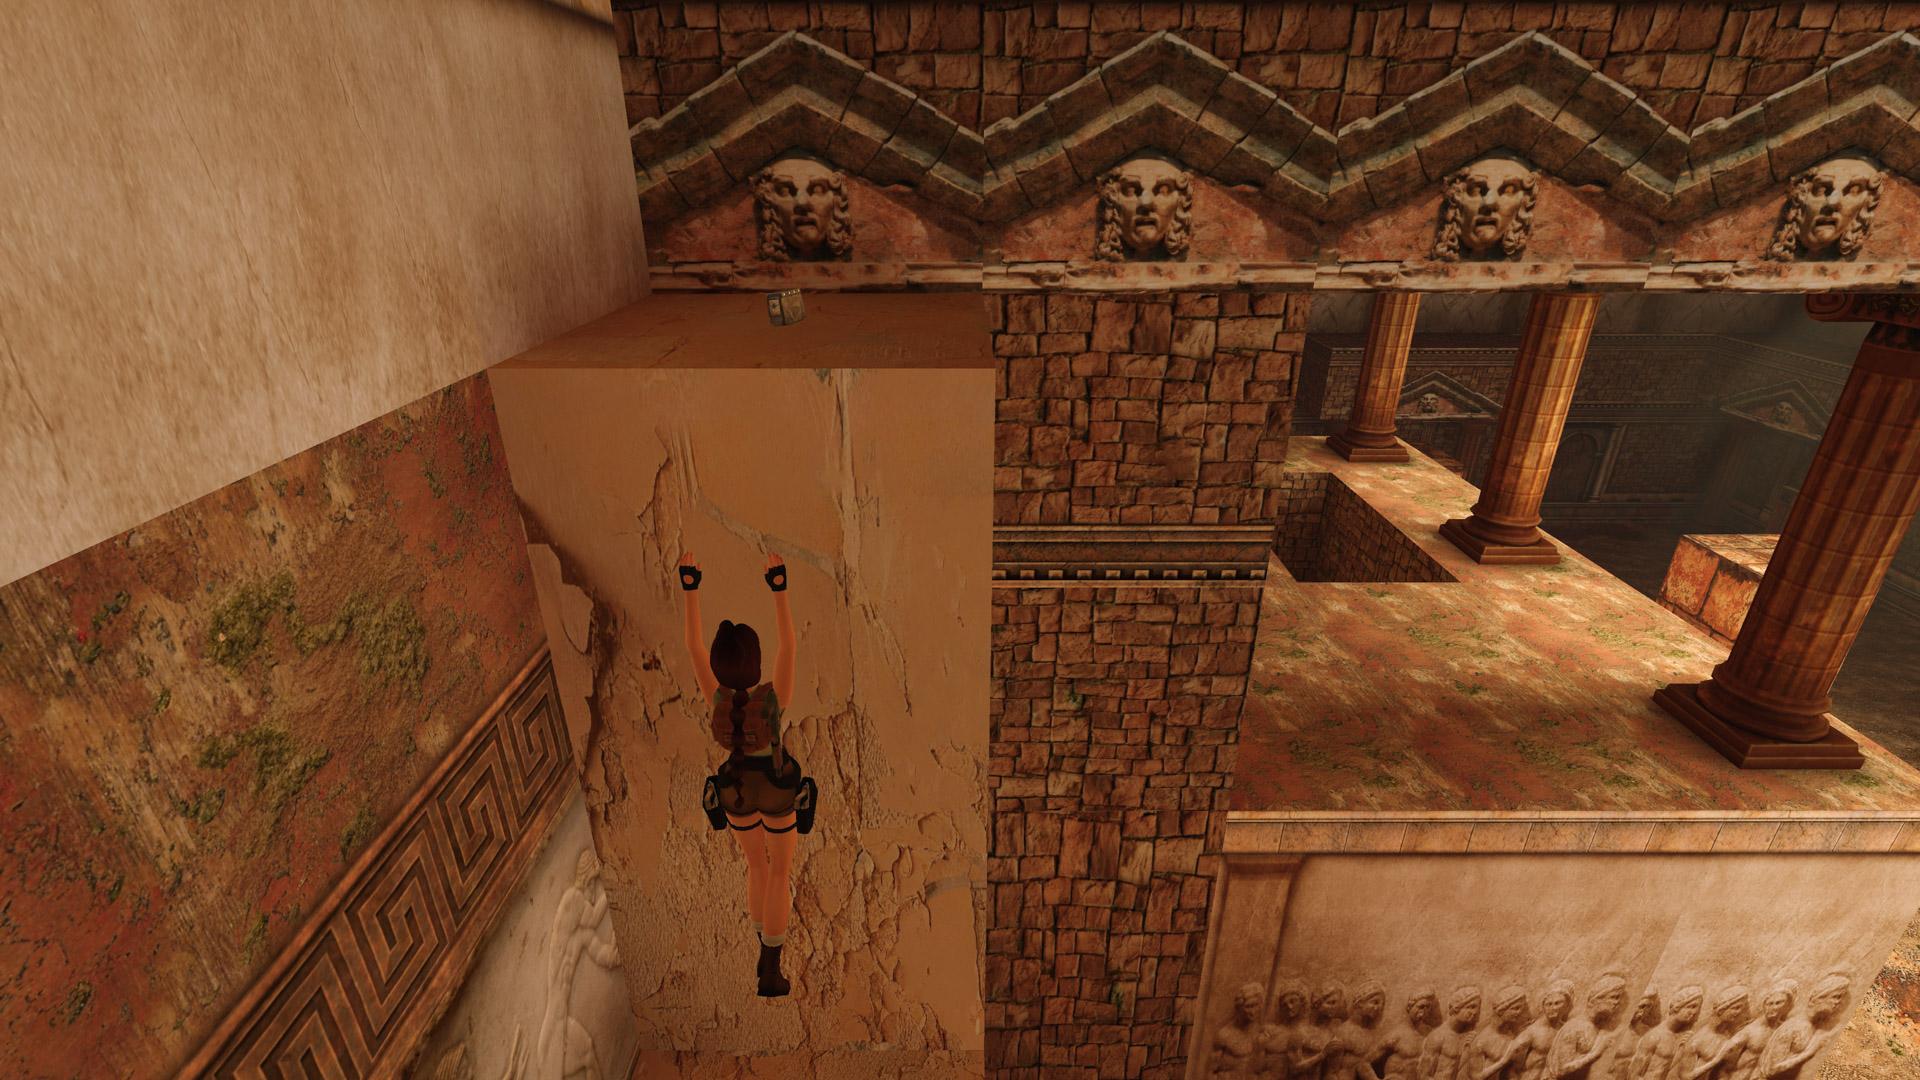 Lara Croft trying to reach the the unreachable medipack in Tomb Raider I's Palace Midas